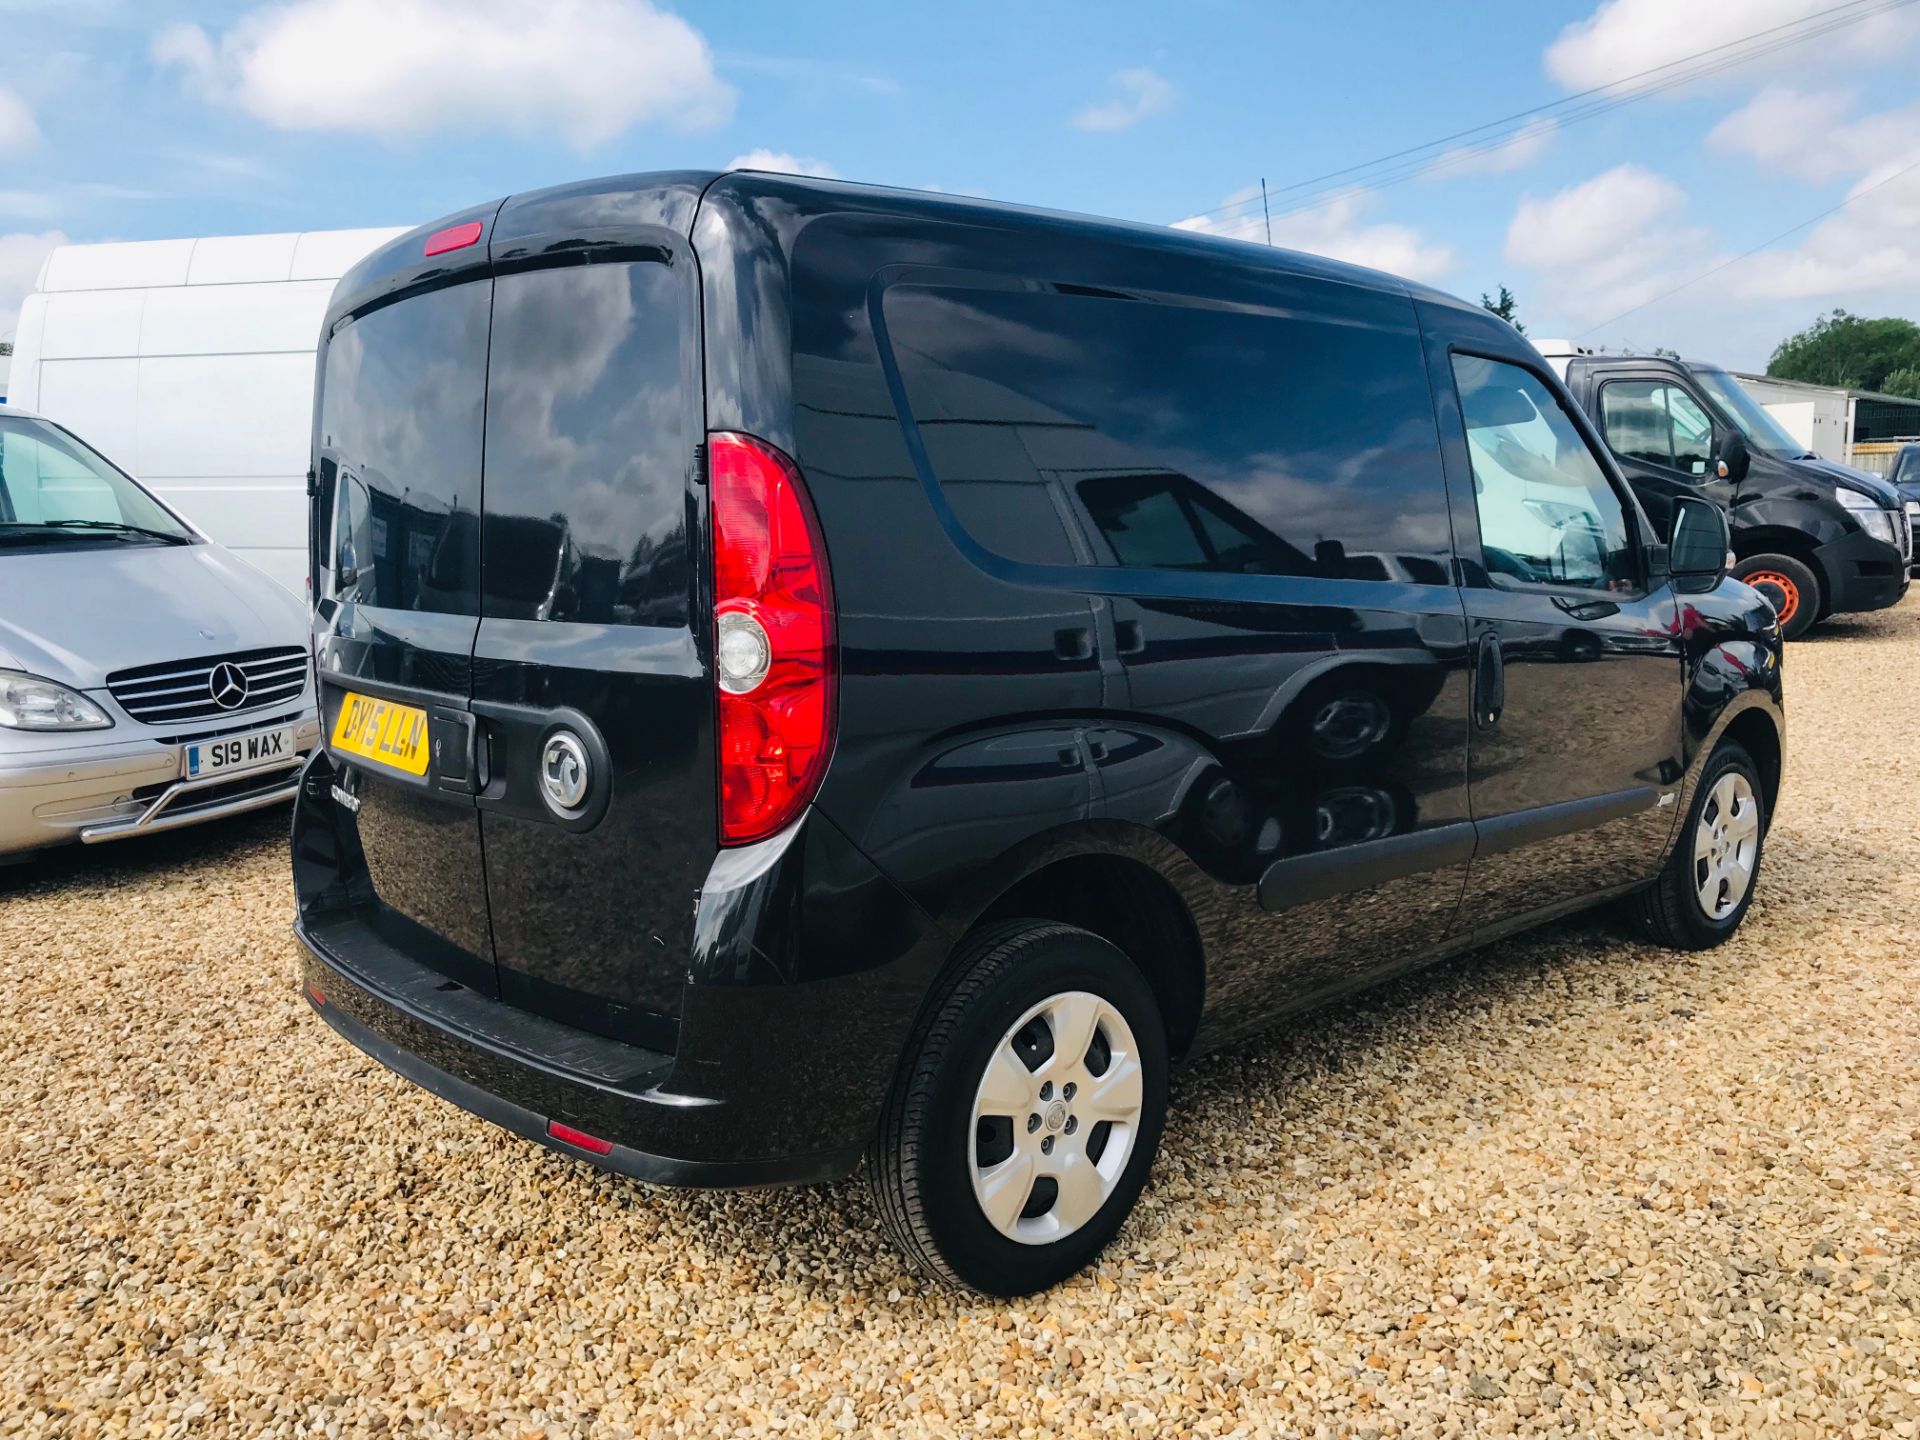 VAUXHALL COMBO CDTI "SPORTIVE - BLACK EDITION" (15 REG - NEW SHAPE) 1 OWNER FSH *AIR CON* ELEC PACK - Image 3 of 15